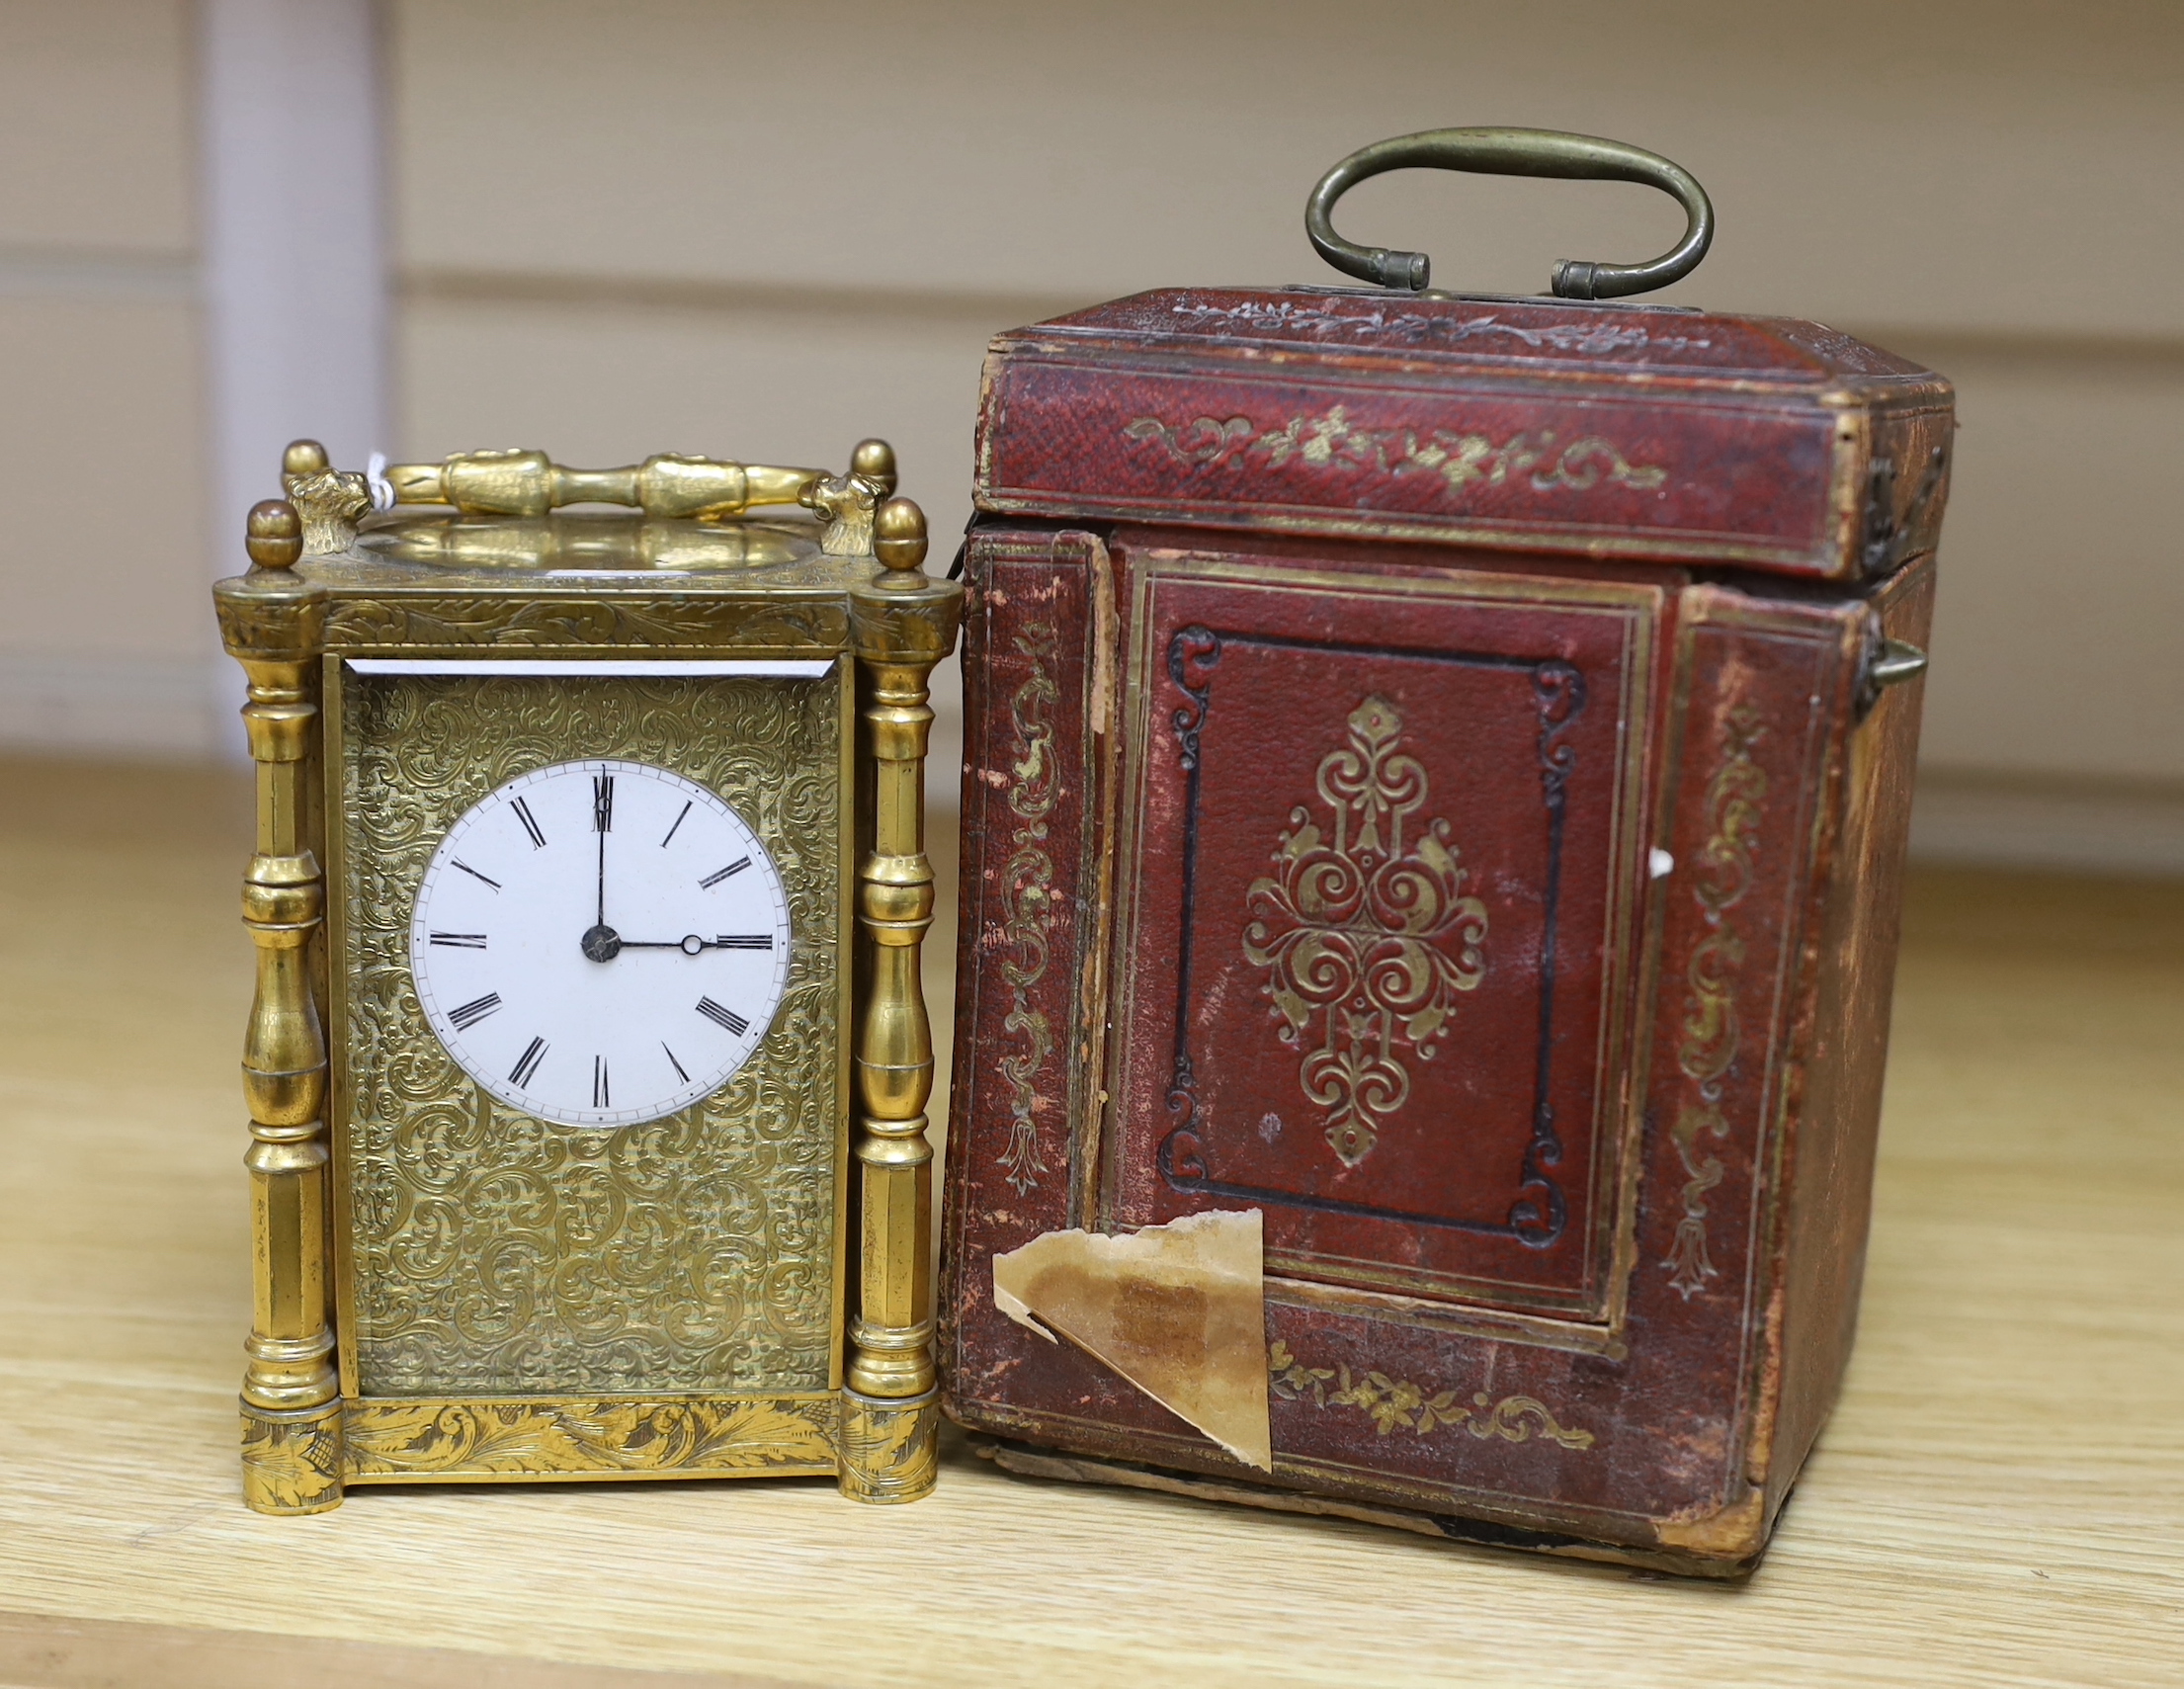 A mid 19th century French engraved gilt brass carriage clock, with tooled leather case, 16cm high - Image 6 of 6